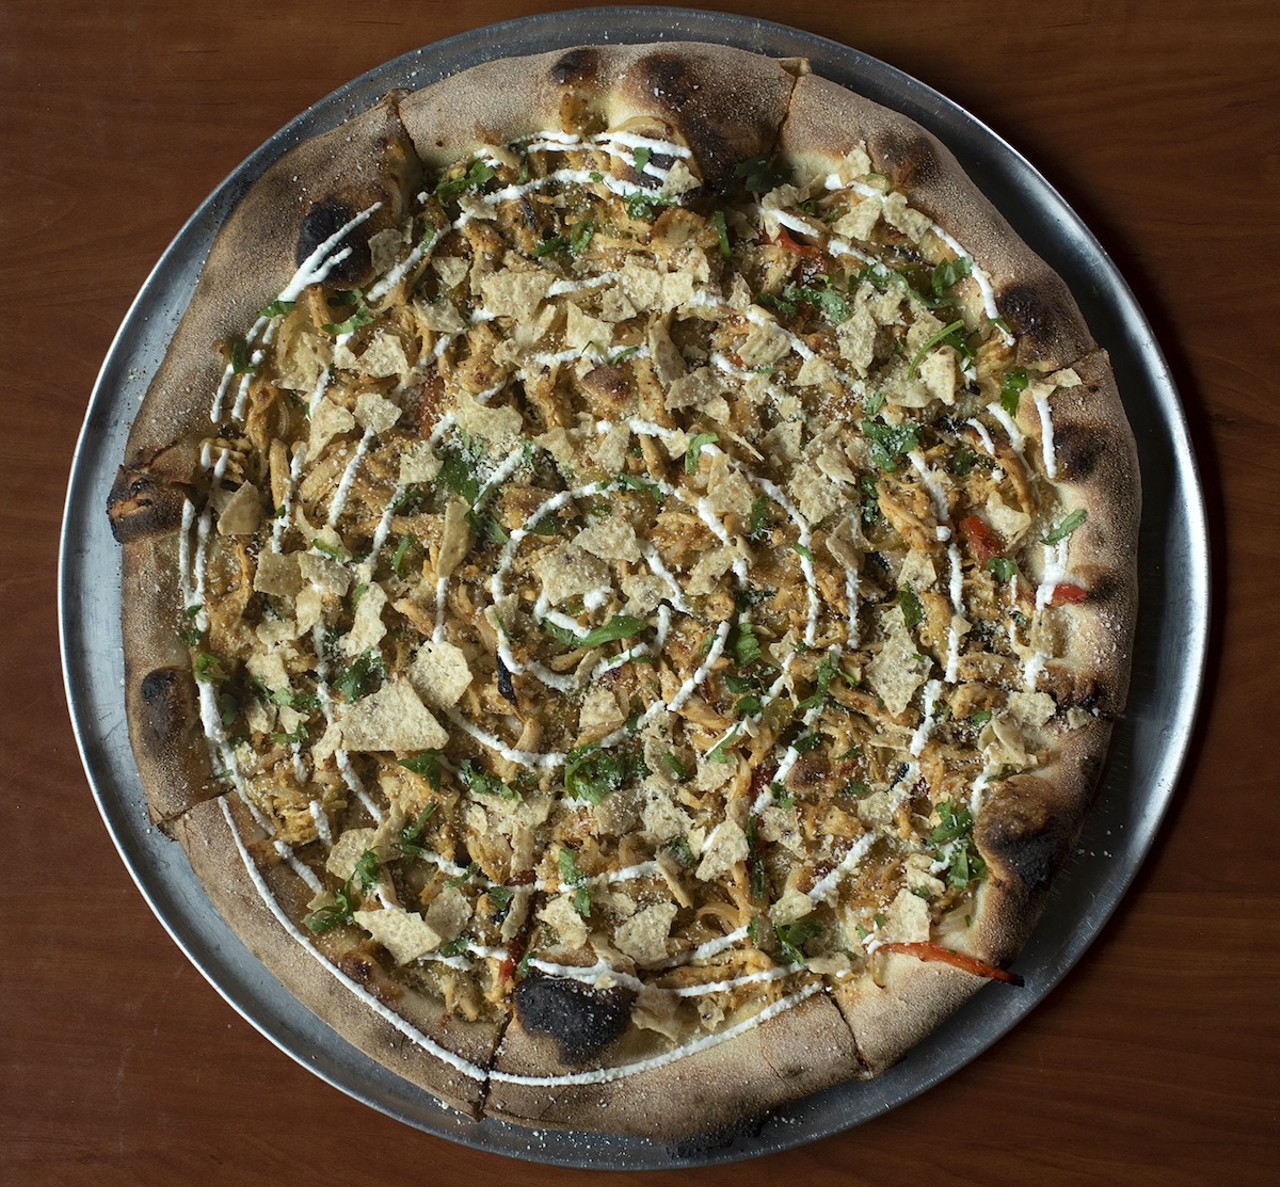 Fireside Pizza
773 E. McMillan St., Walnut Hills
Taquito Pizza: A 10-inch pizza with house-made salsa verde, shredded chicken, charred onions and peppers and Chihuahua cheese, garnished with cotija cheese, house-made lime crema, cilantro and tortilla chips.